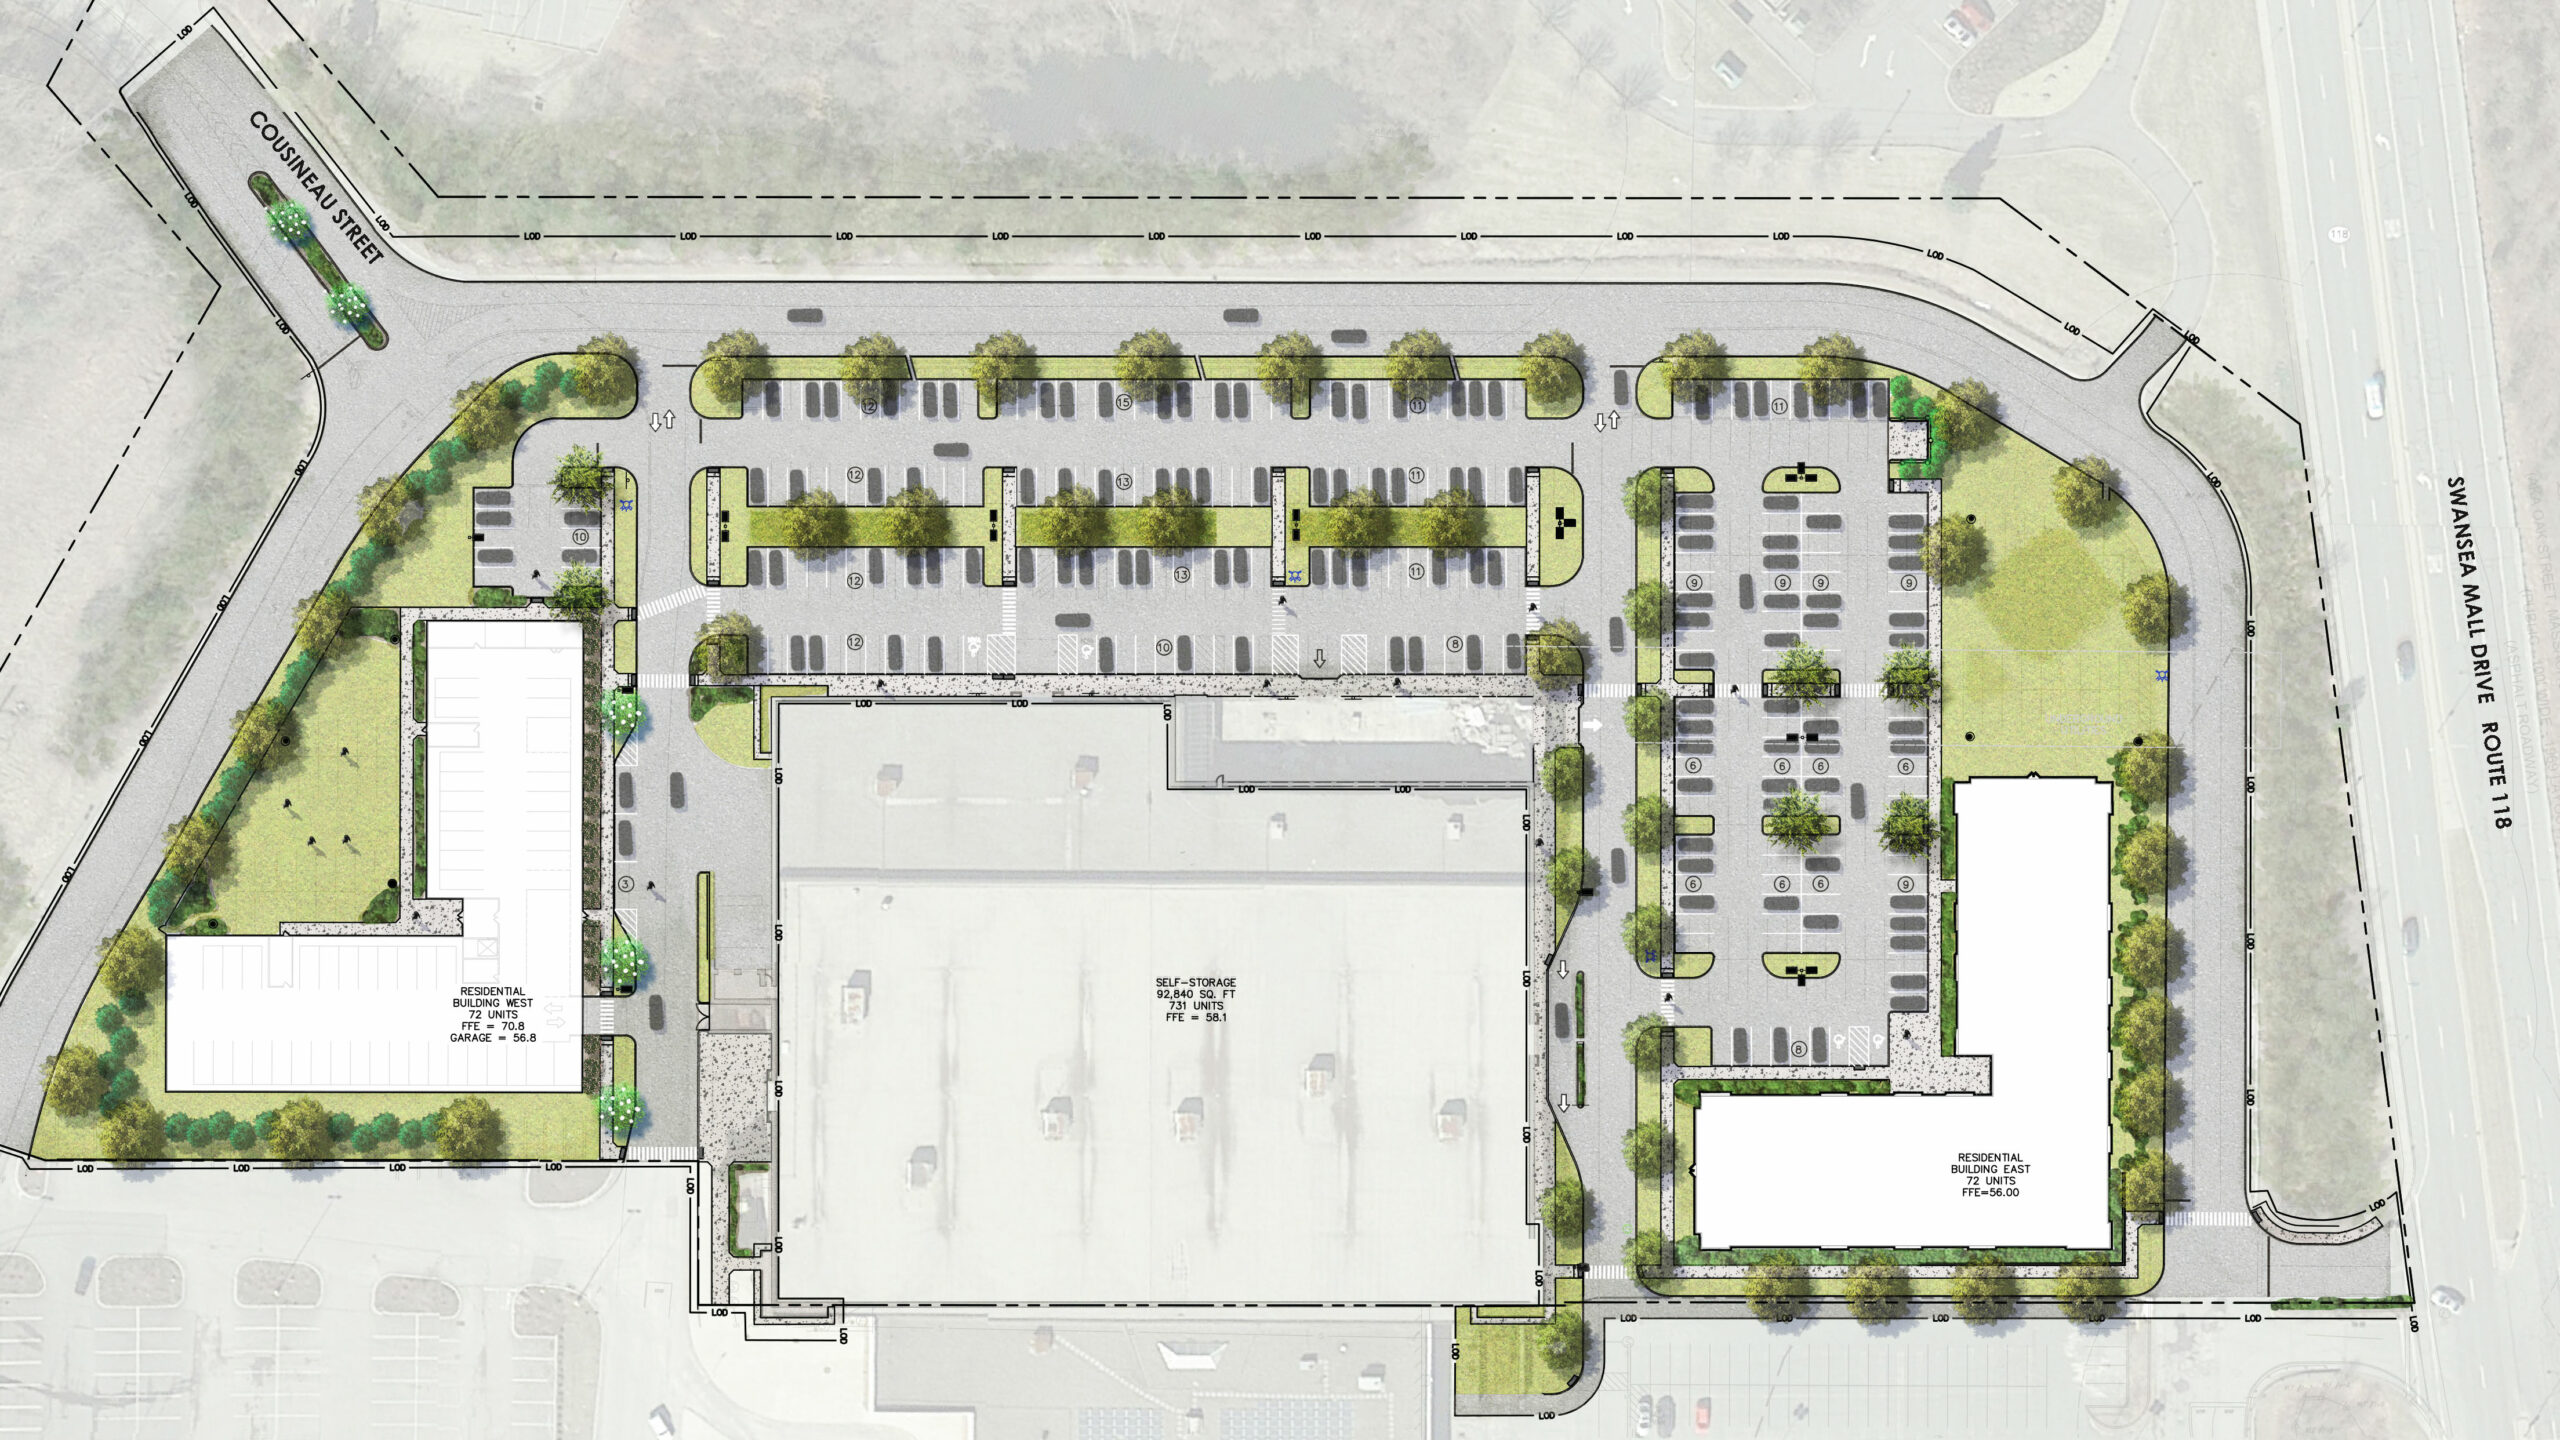 Swansea mall plan showing building, parking lot and trees